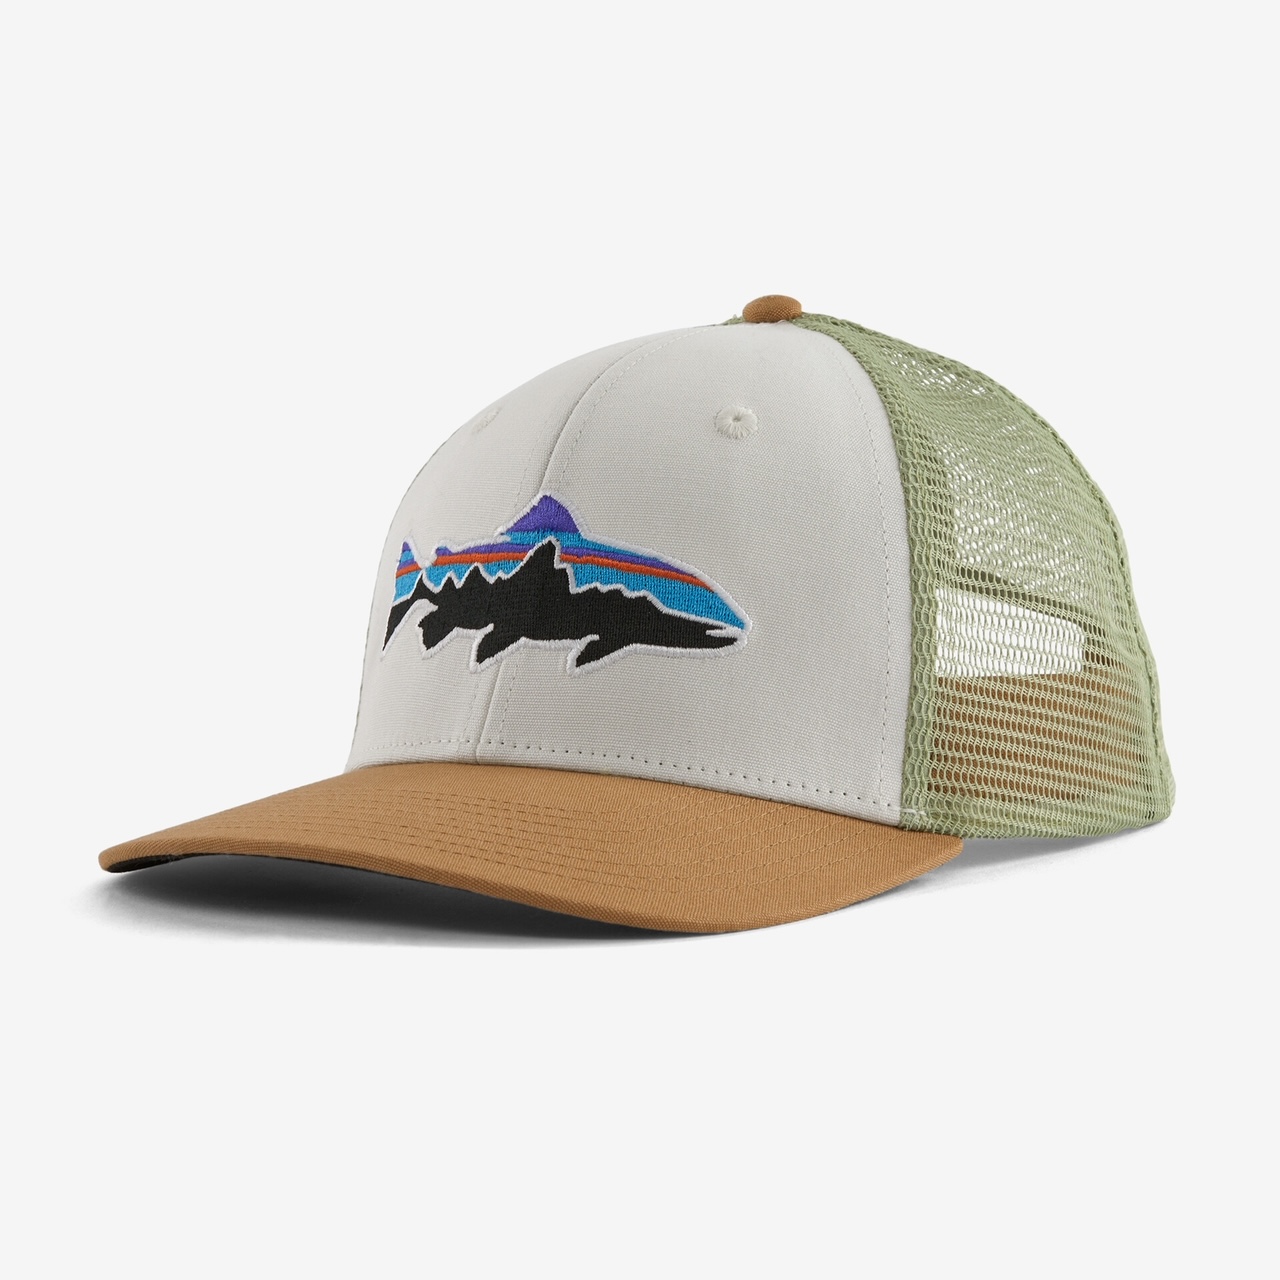 Patagonia Fitz Roy Trout Trucker Hat - White w/ Classic Tan